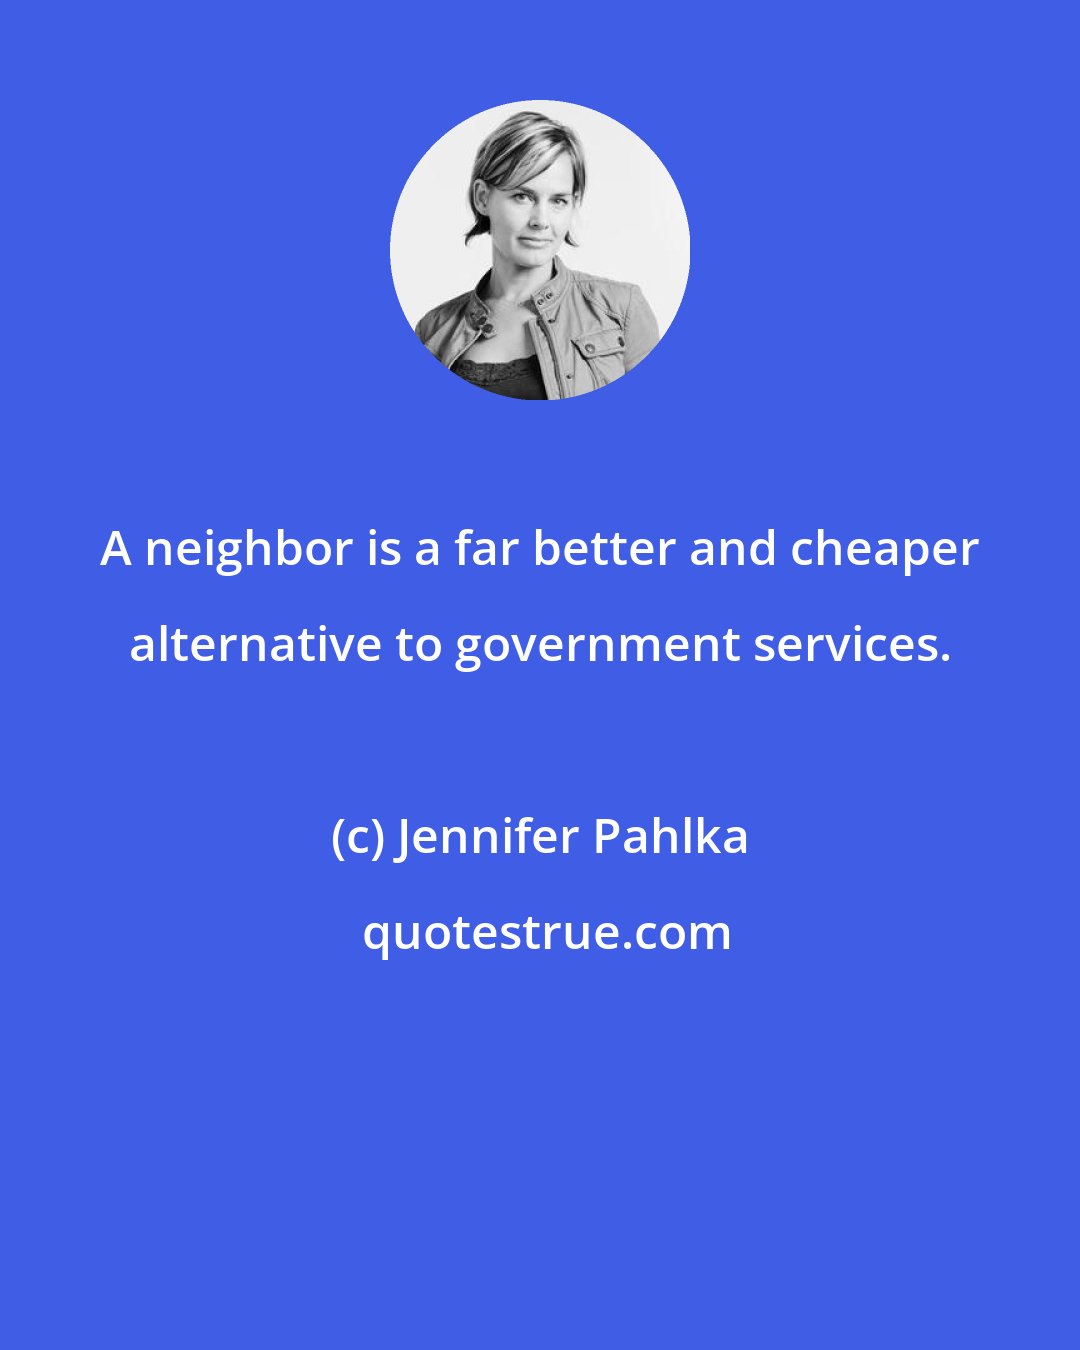 Jennifer Pahlka: A neighbor is a far better and cheaper alternative to government services.